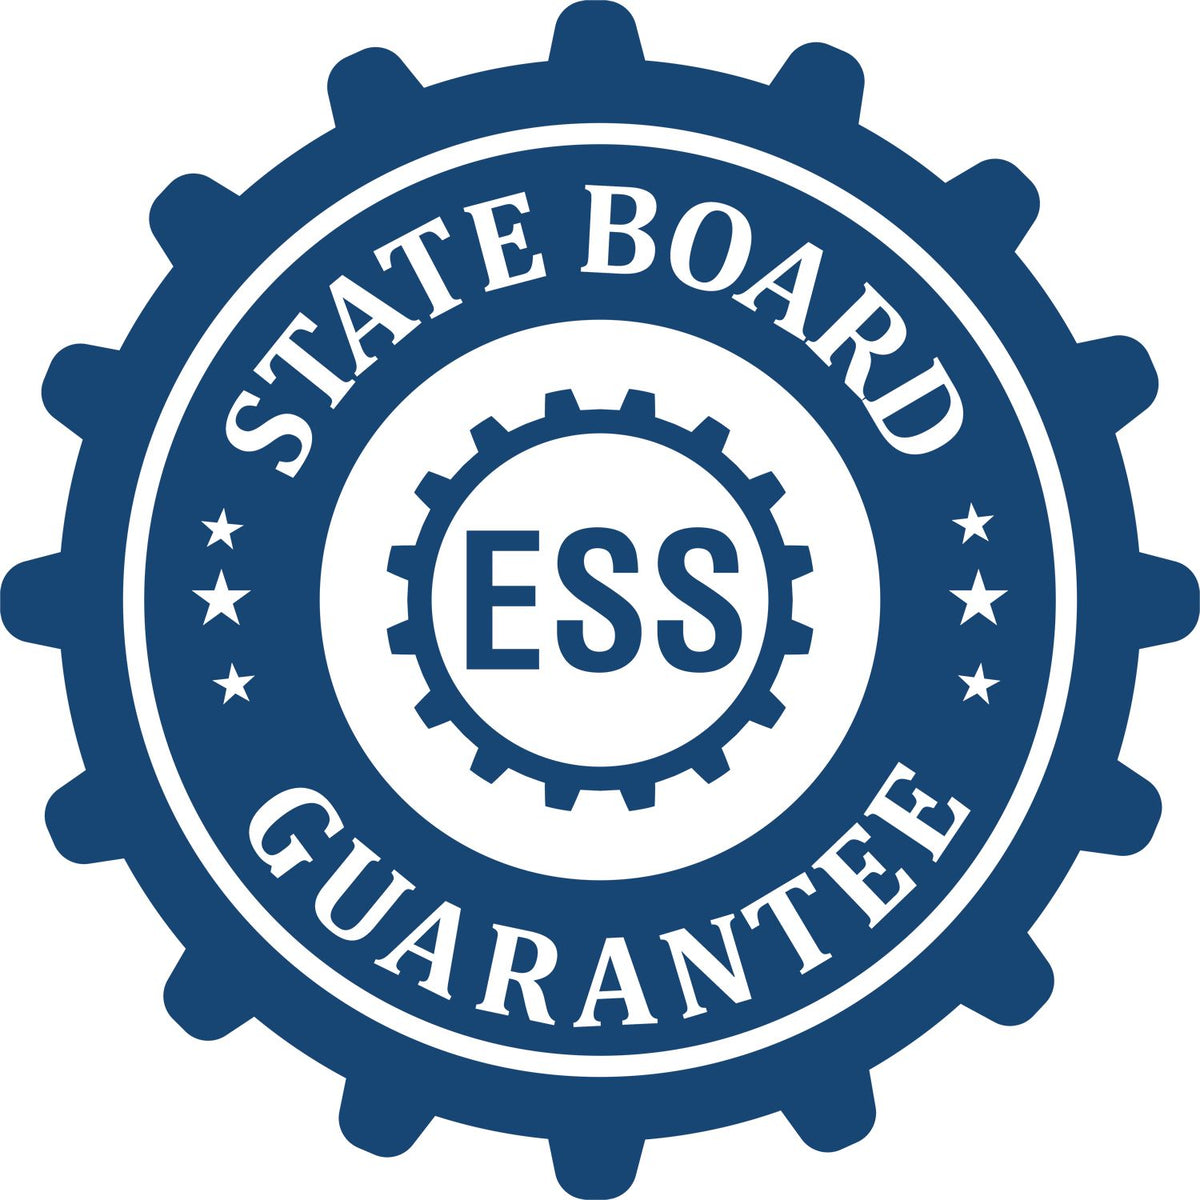 An emblem in a gear shape illustrating a state board guarantee for the State of Alaska Extended Long Reach Engineer Seal product.